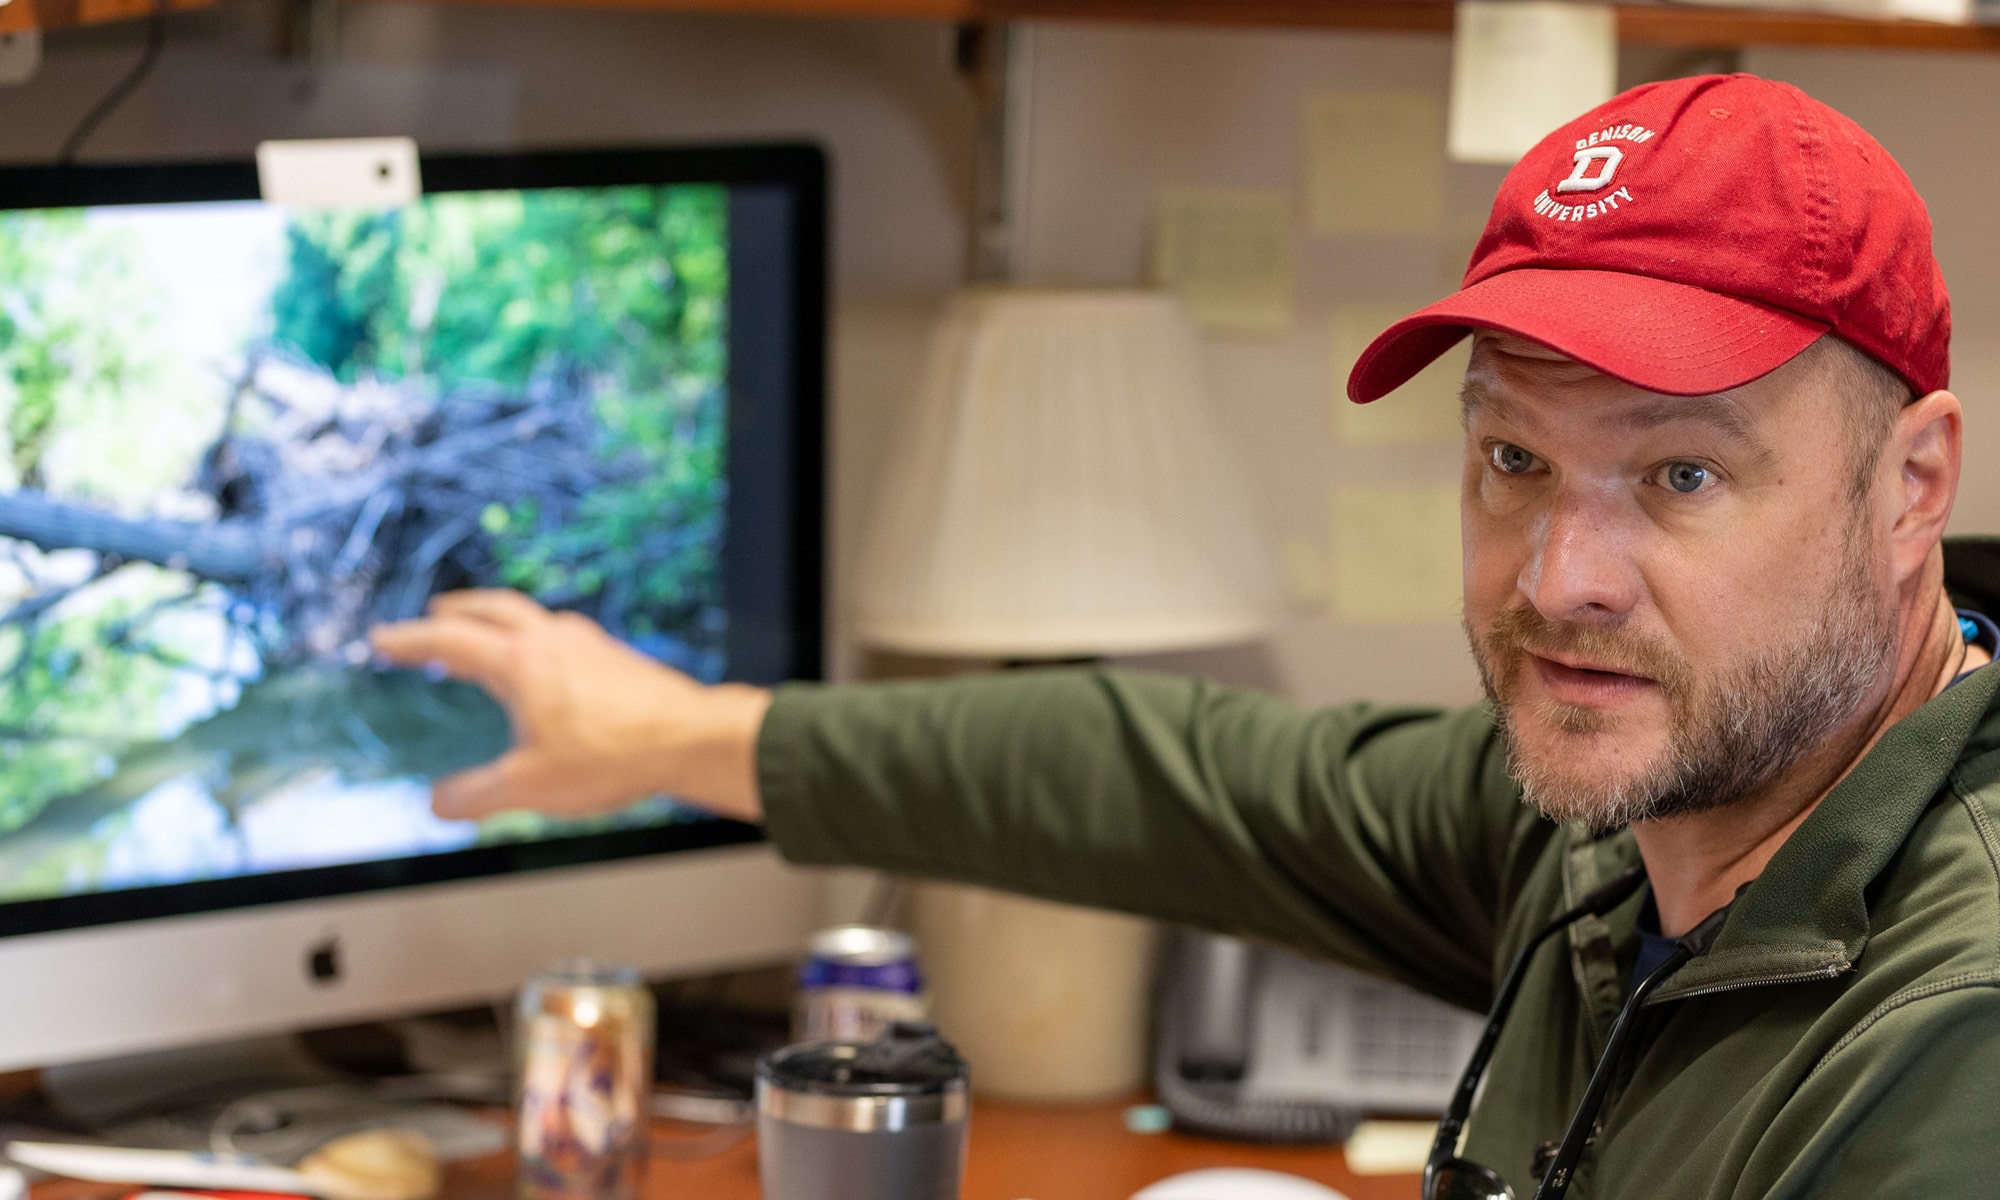 David Goodwin points to an image of Raccoon Creek on his computer screen